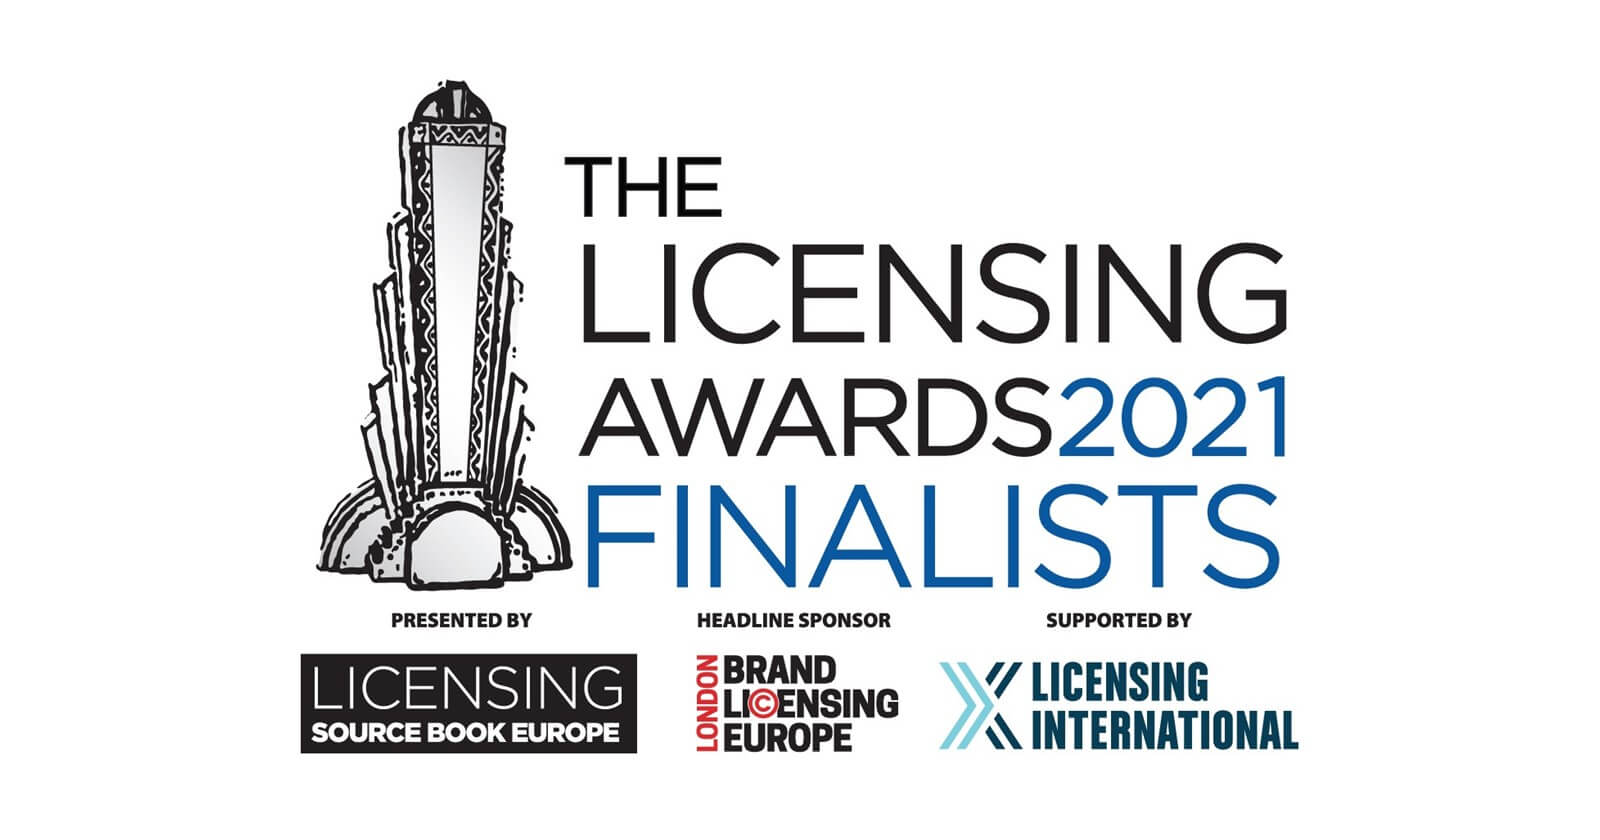 UK Licensing Awards 2021: The Finalists image